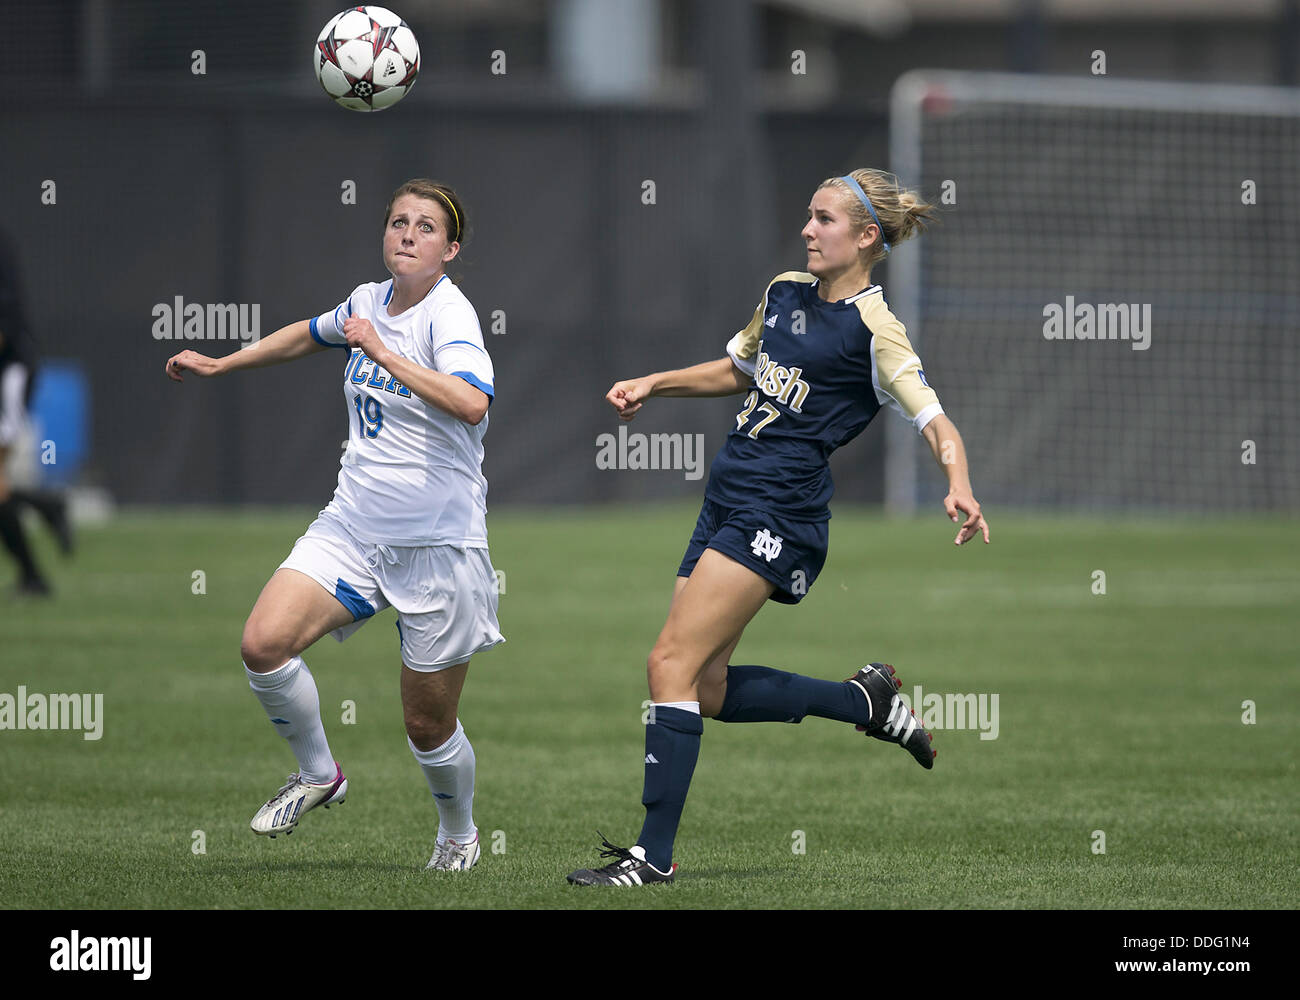 South Bend, Indiana, USA. 1st Sep, 2013. September 01, 2013: Notre Dame forward Kaleigh Olmsted (27) and UCLA defender Chelsea Stewart (19) battle for the loose ball during NCAA Soccer match between the Notre Dame Fighting Irish and the UCLA Bruins at Alumni Stadium in South Bend, Indiana. UCLA defeated Notre Dame 1-0. © csm/Alamy Live News Stock Photo